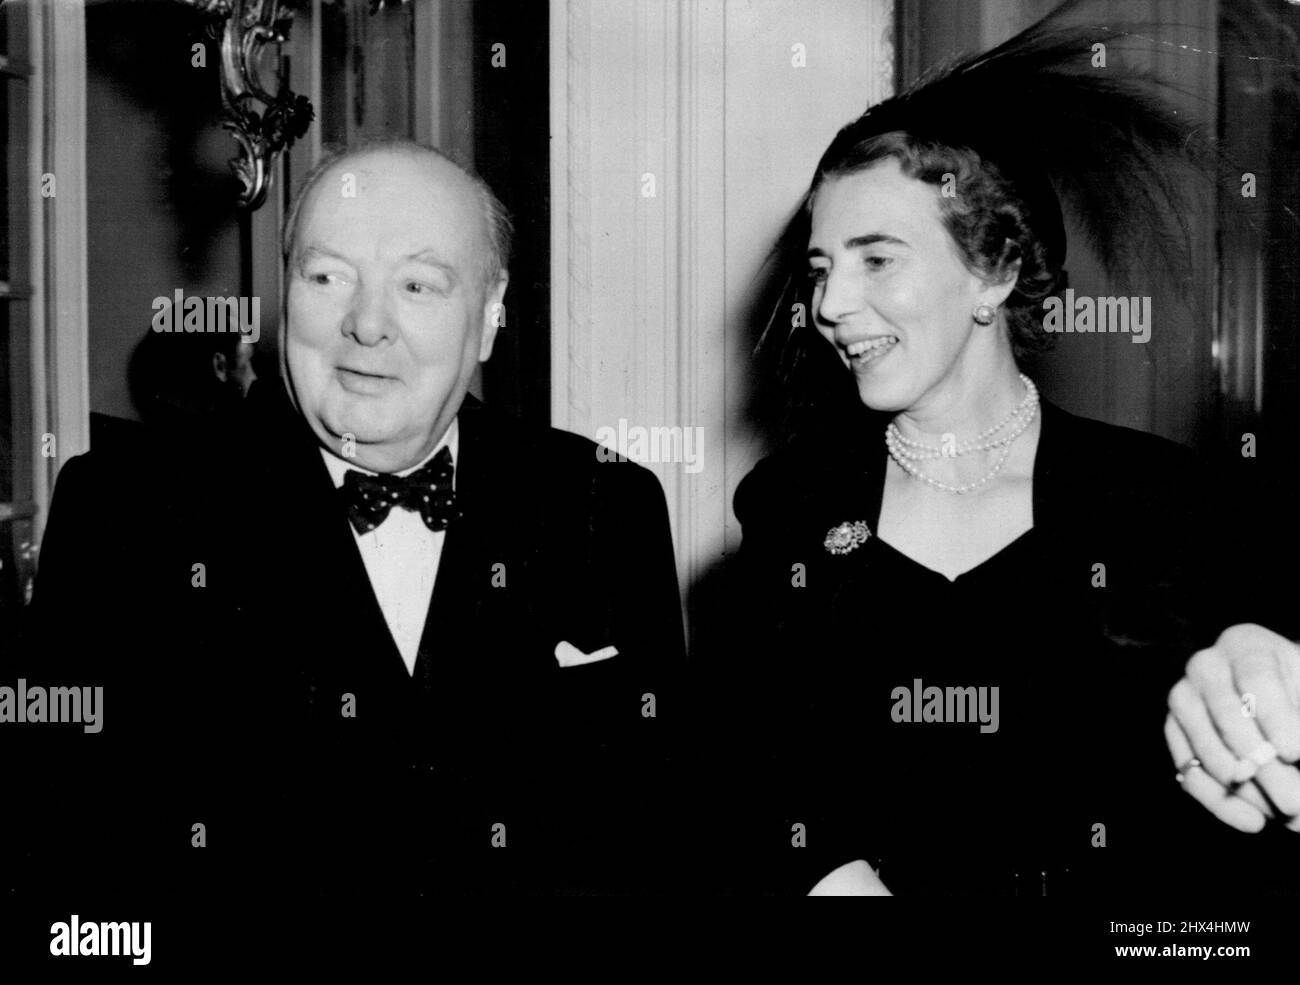 Winston's Birthday Smile - Mr.Winston Churchill ' s 75th birthday smile when he was pictures at the luncheon with Queen Ingrid of Demark. Mr. Winston Churchill, who is celebrating his 75th birthday, was guest of honour at a luncheon given at the Danish Embassy, Pont street, London, to-day (Wednesday). The King and Queen of Denmark, at present visiting England, and Mr. Clement Attlee, British premier, were present. November 30, 1949. (Photo by Reuterphoto). Stock Photo